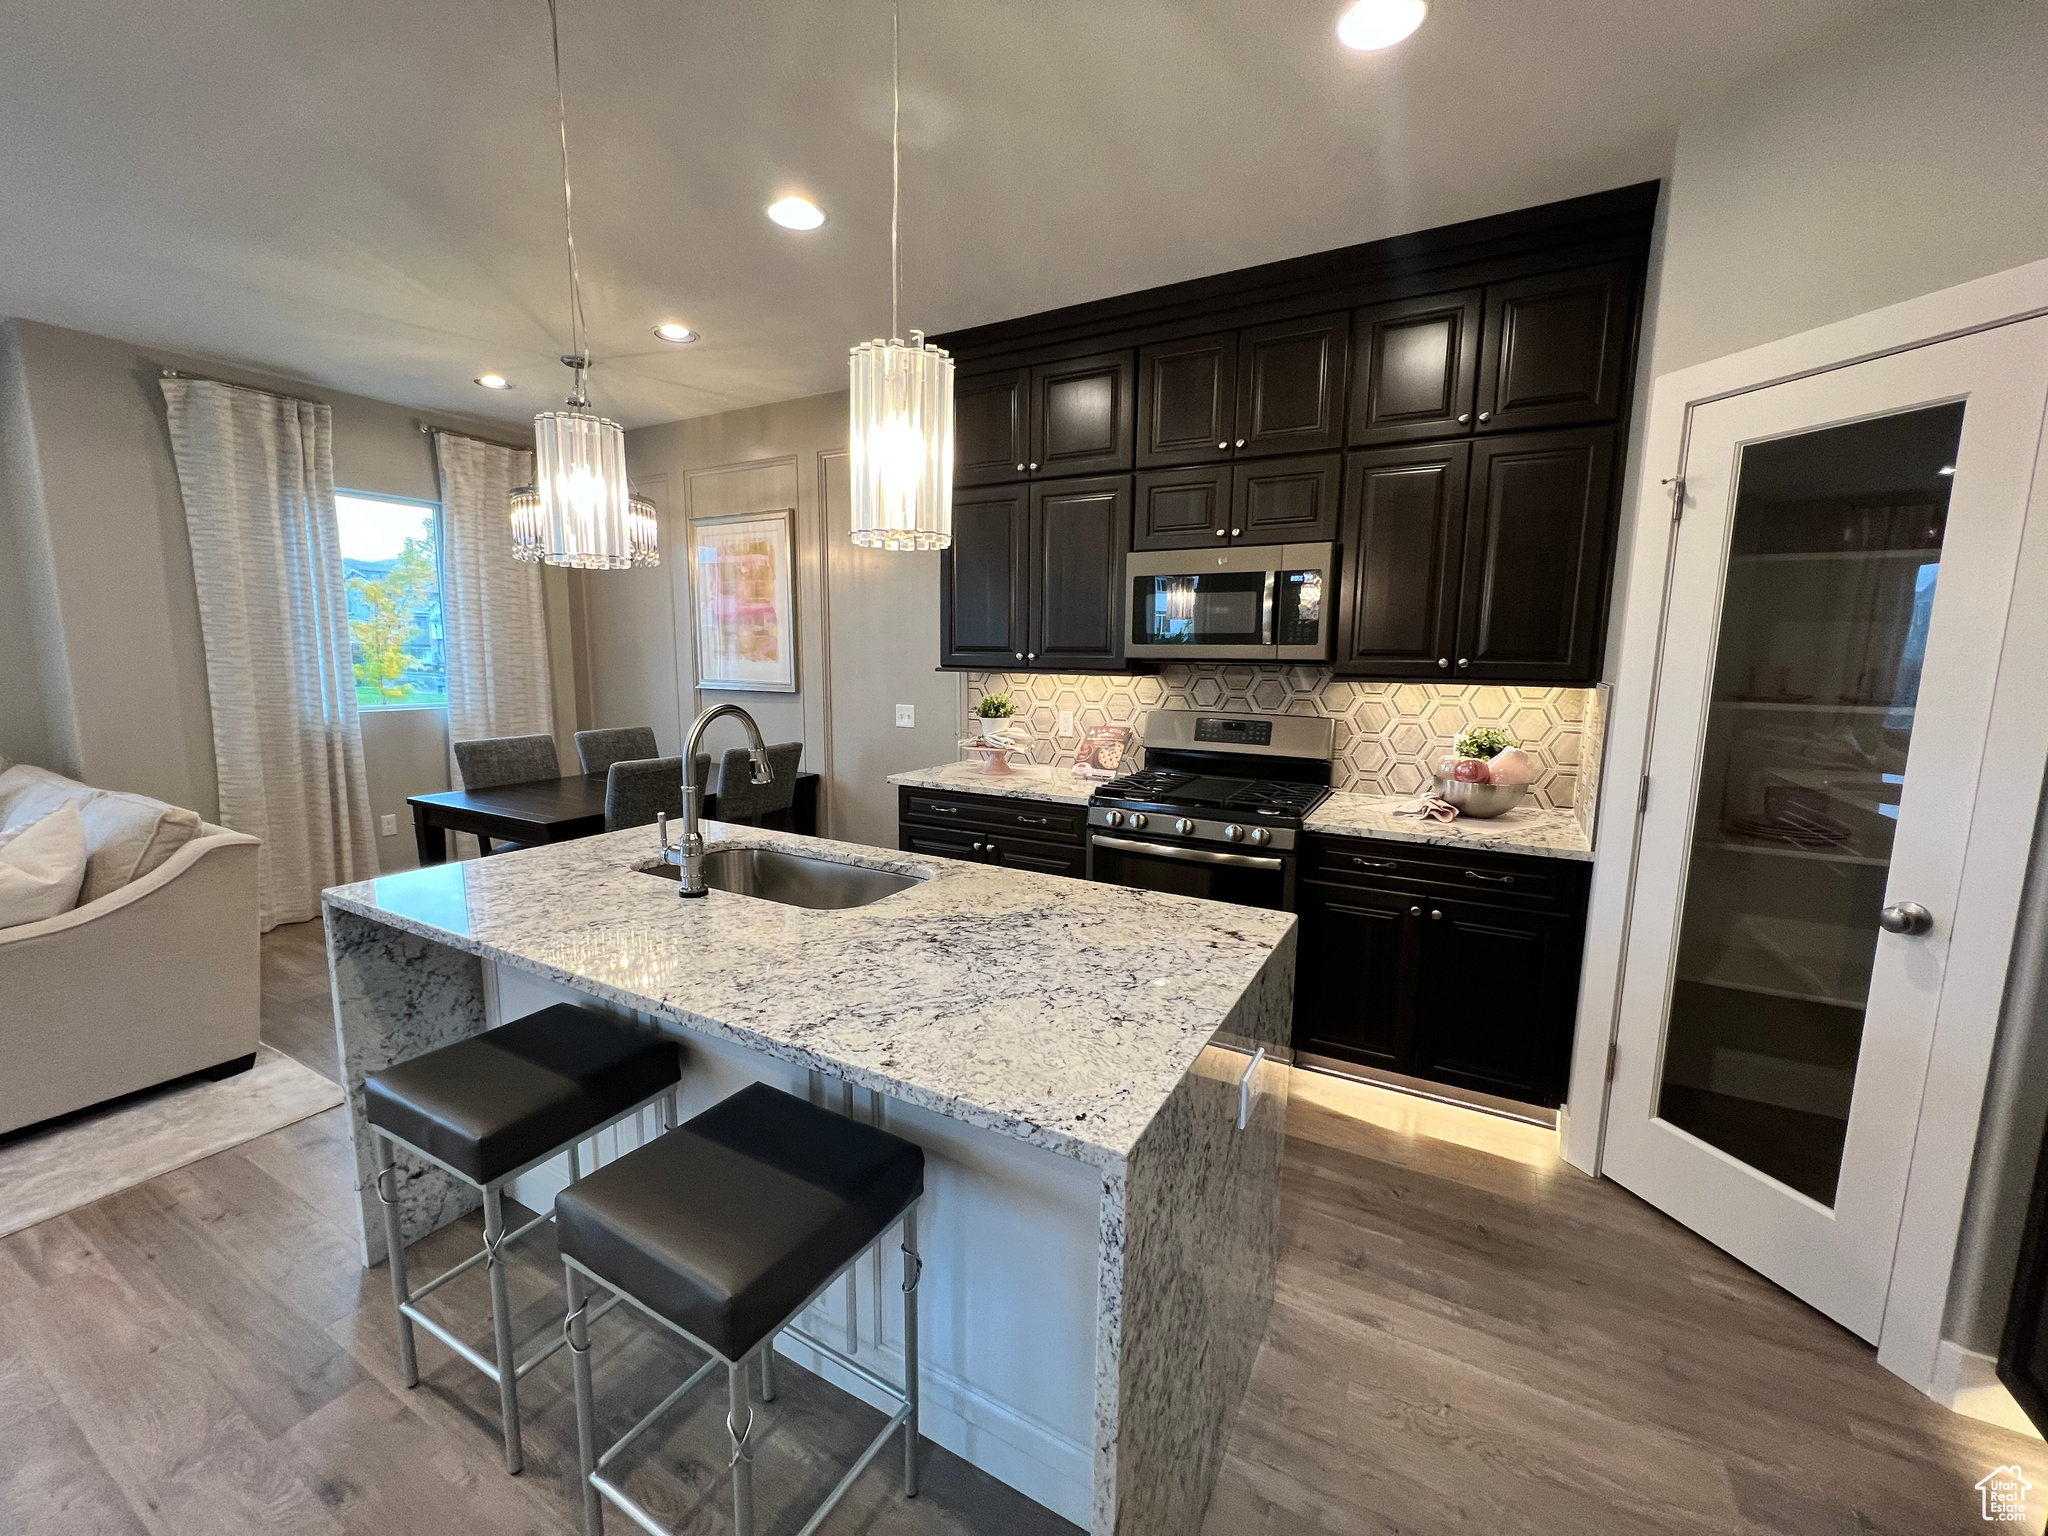 Kitchen featuring stainless steel appliances, hardwood / wood-style flooring, an island with sink, a kitchen breakfast bar, and sink